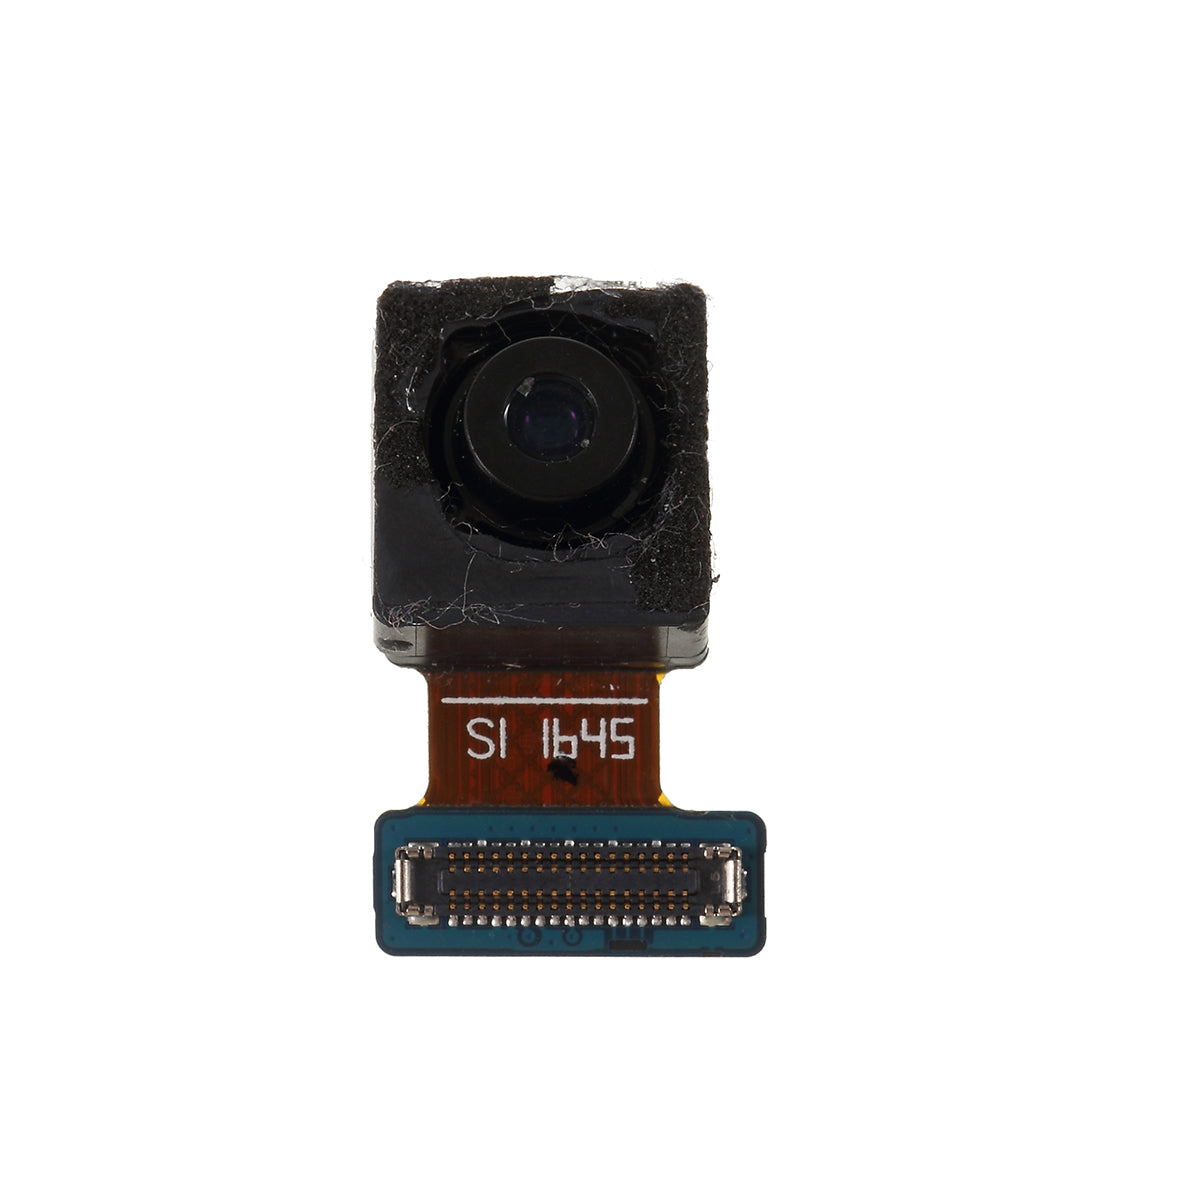 OEM Front Facing Camera Module Part for Samsung Galaxy S8 Plus G955U US Version